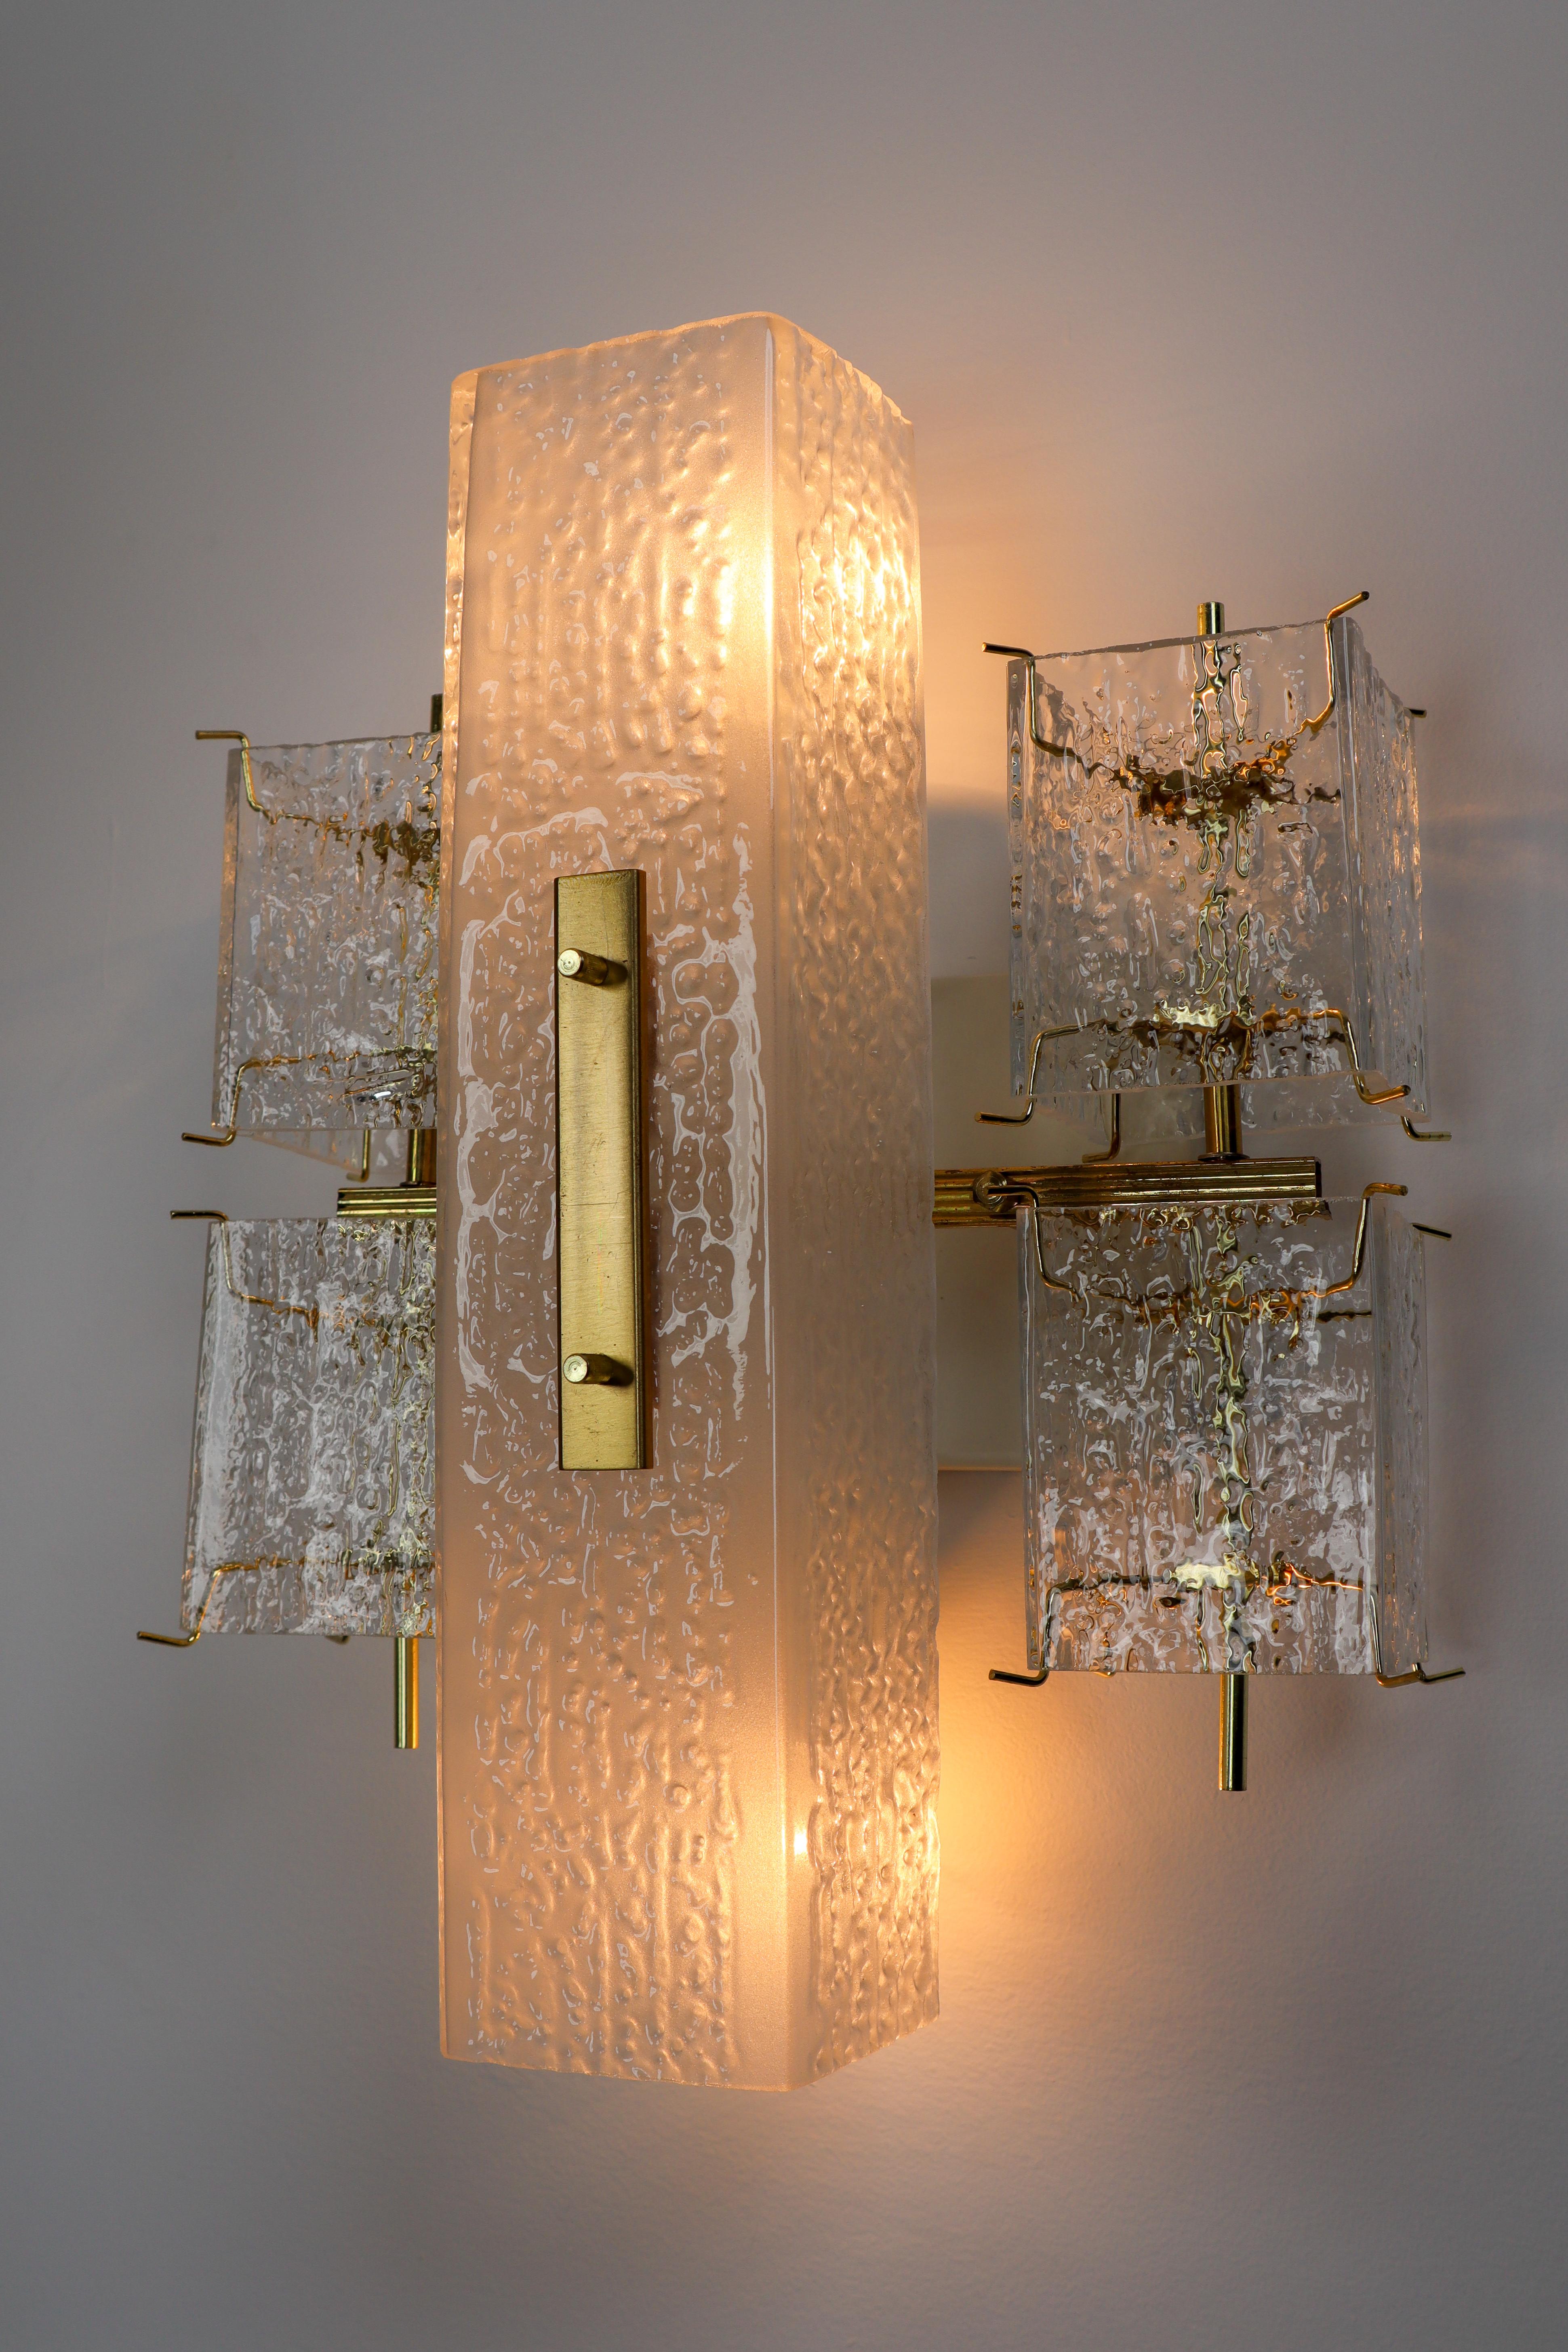 1 of 8 Midcentury Wall Lights with Structured Glass and Brass, Europe, 1970s For Sale 11